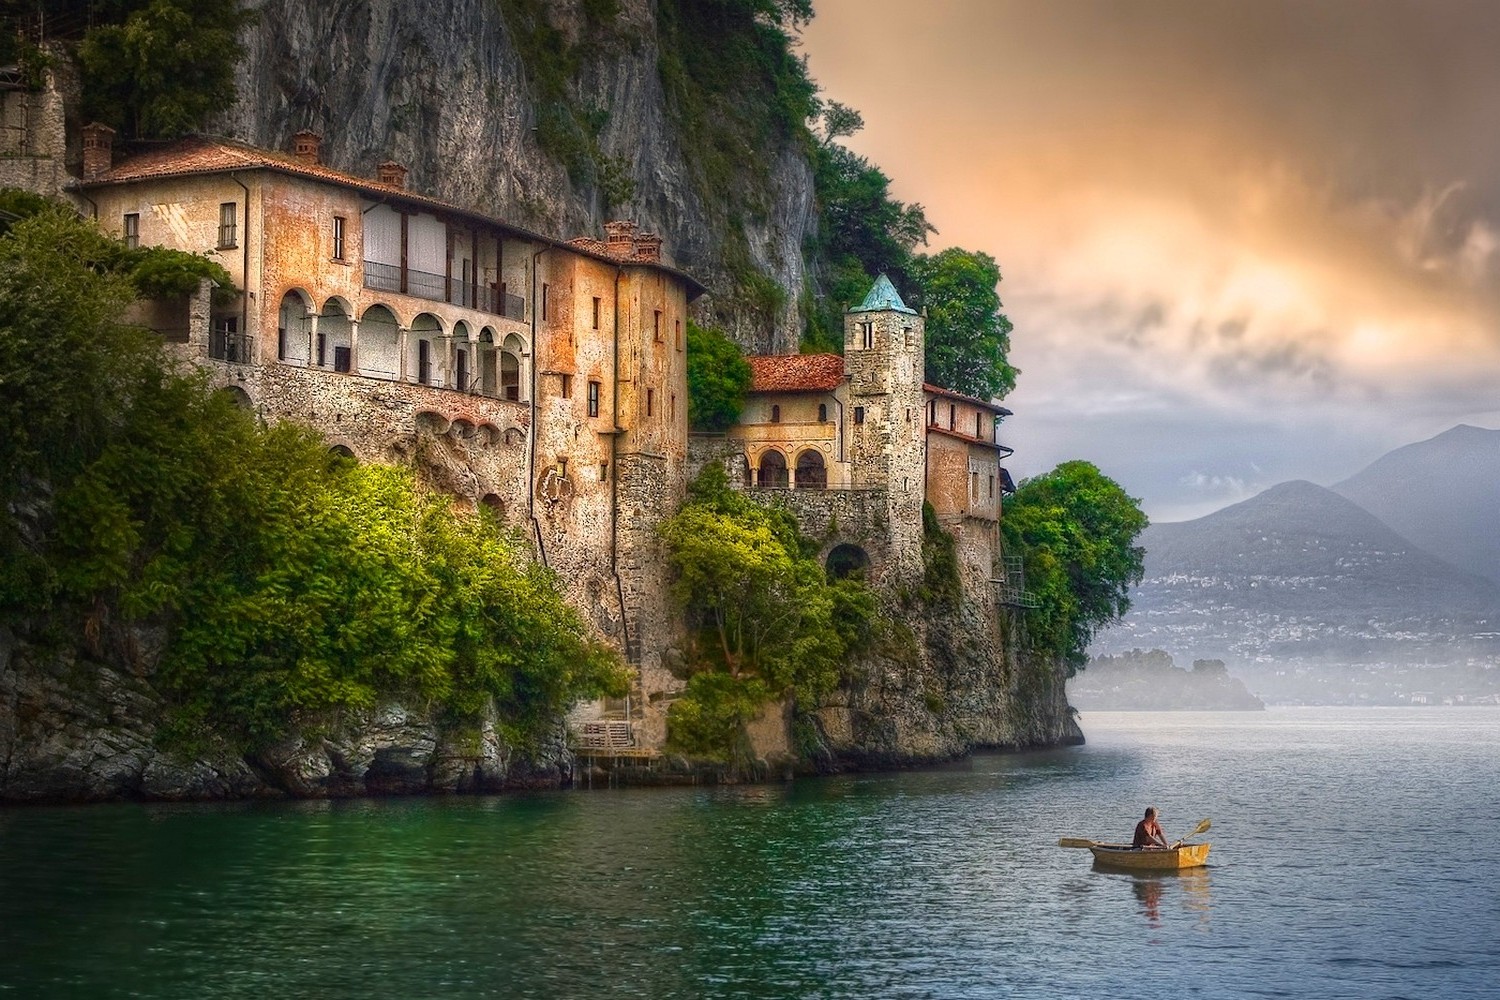 Italy, Hermitage, Cliff, Clouds, Mountain, Boat, Trees, Water, Landscape, Nature Wallpaper